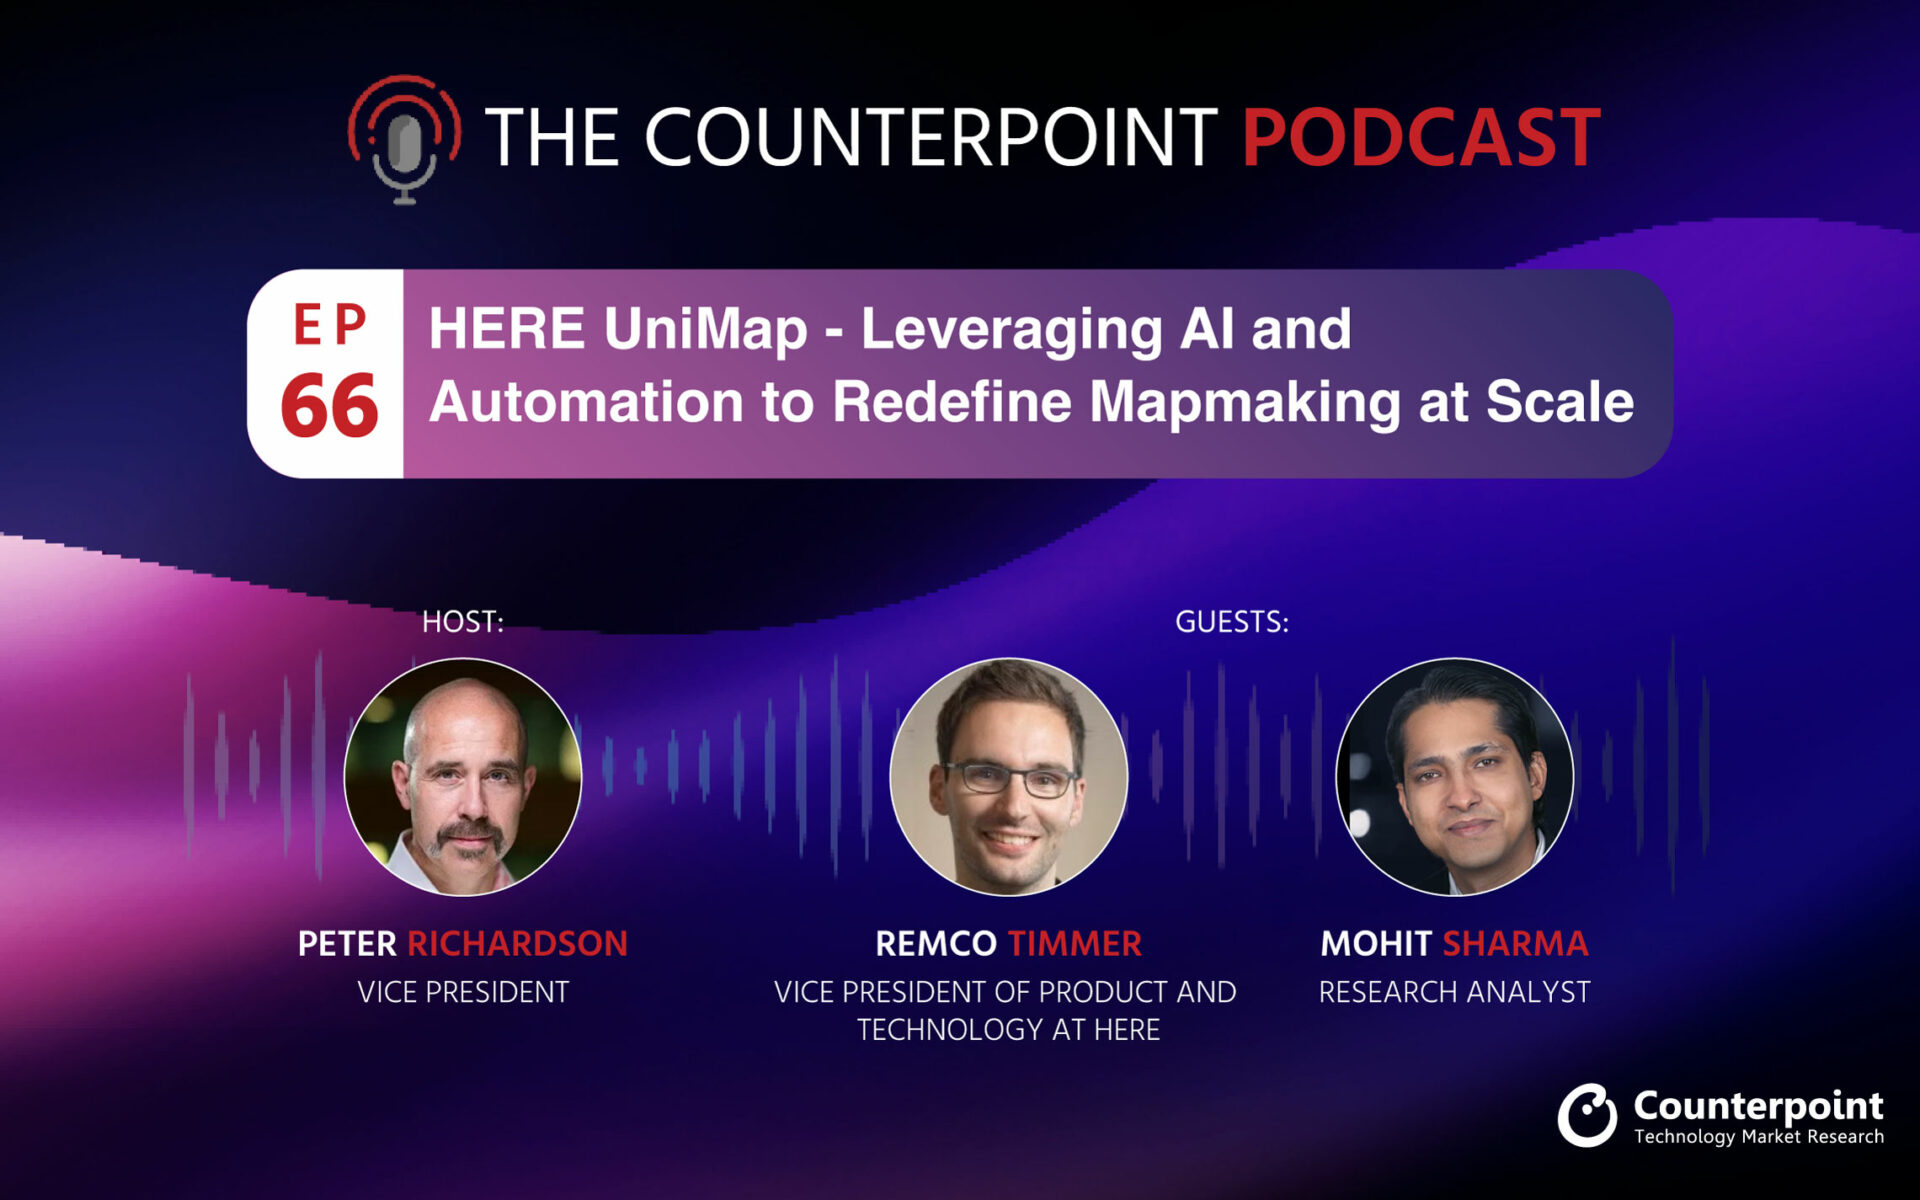 Podcast #66: HERE UniMap – Leveraging AI and Automation to Redefine Mapmaking at Scale